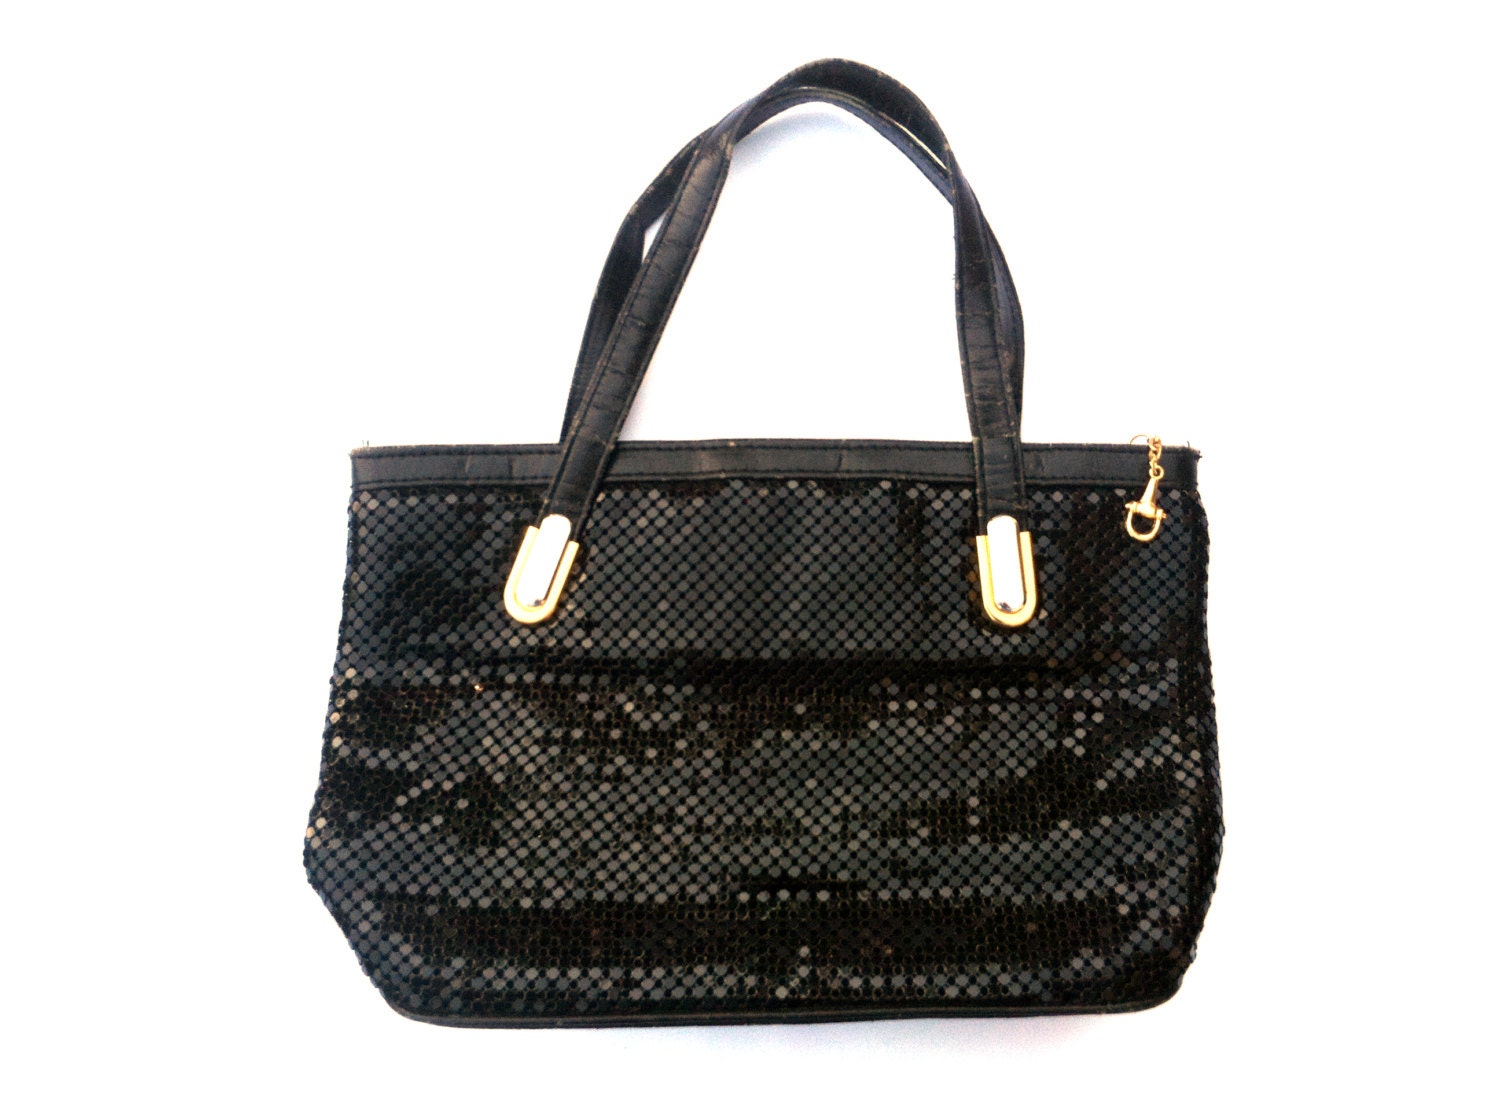 Vintage Chain Mail Metal Handbag with Great Gold + Silver Accents and ...